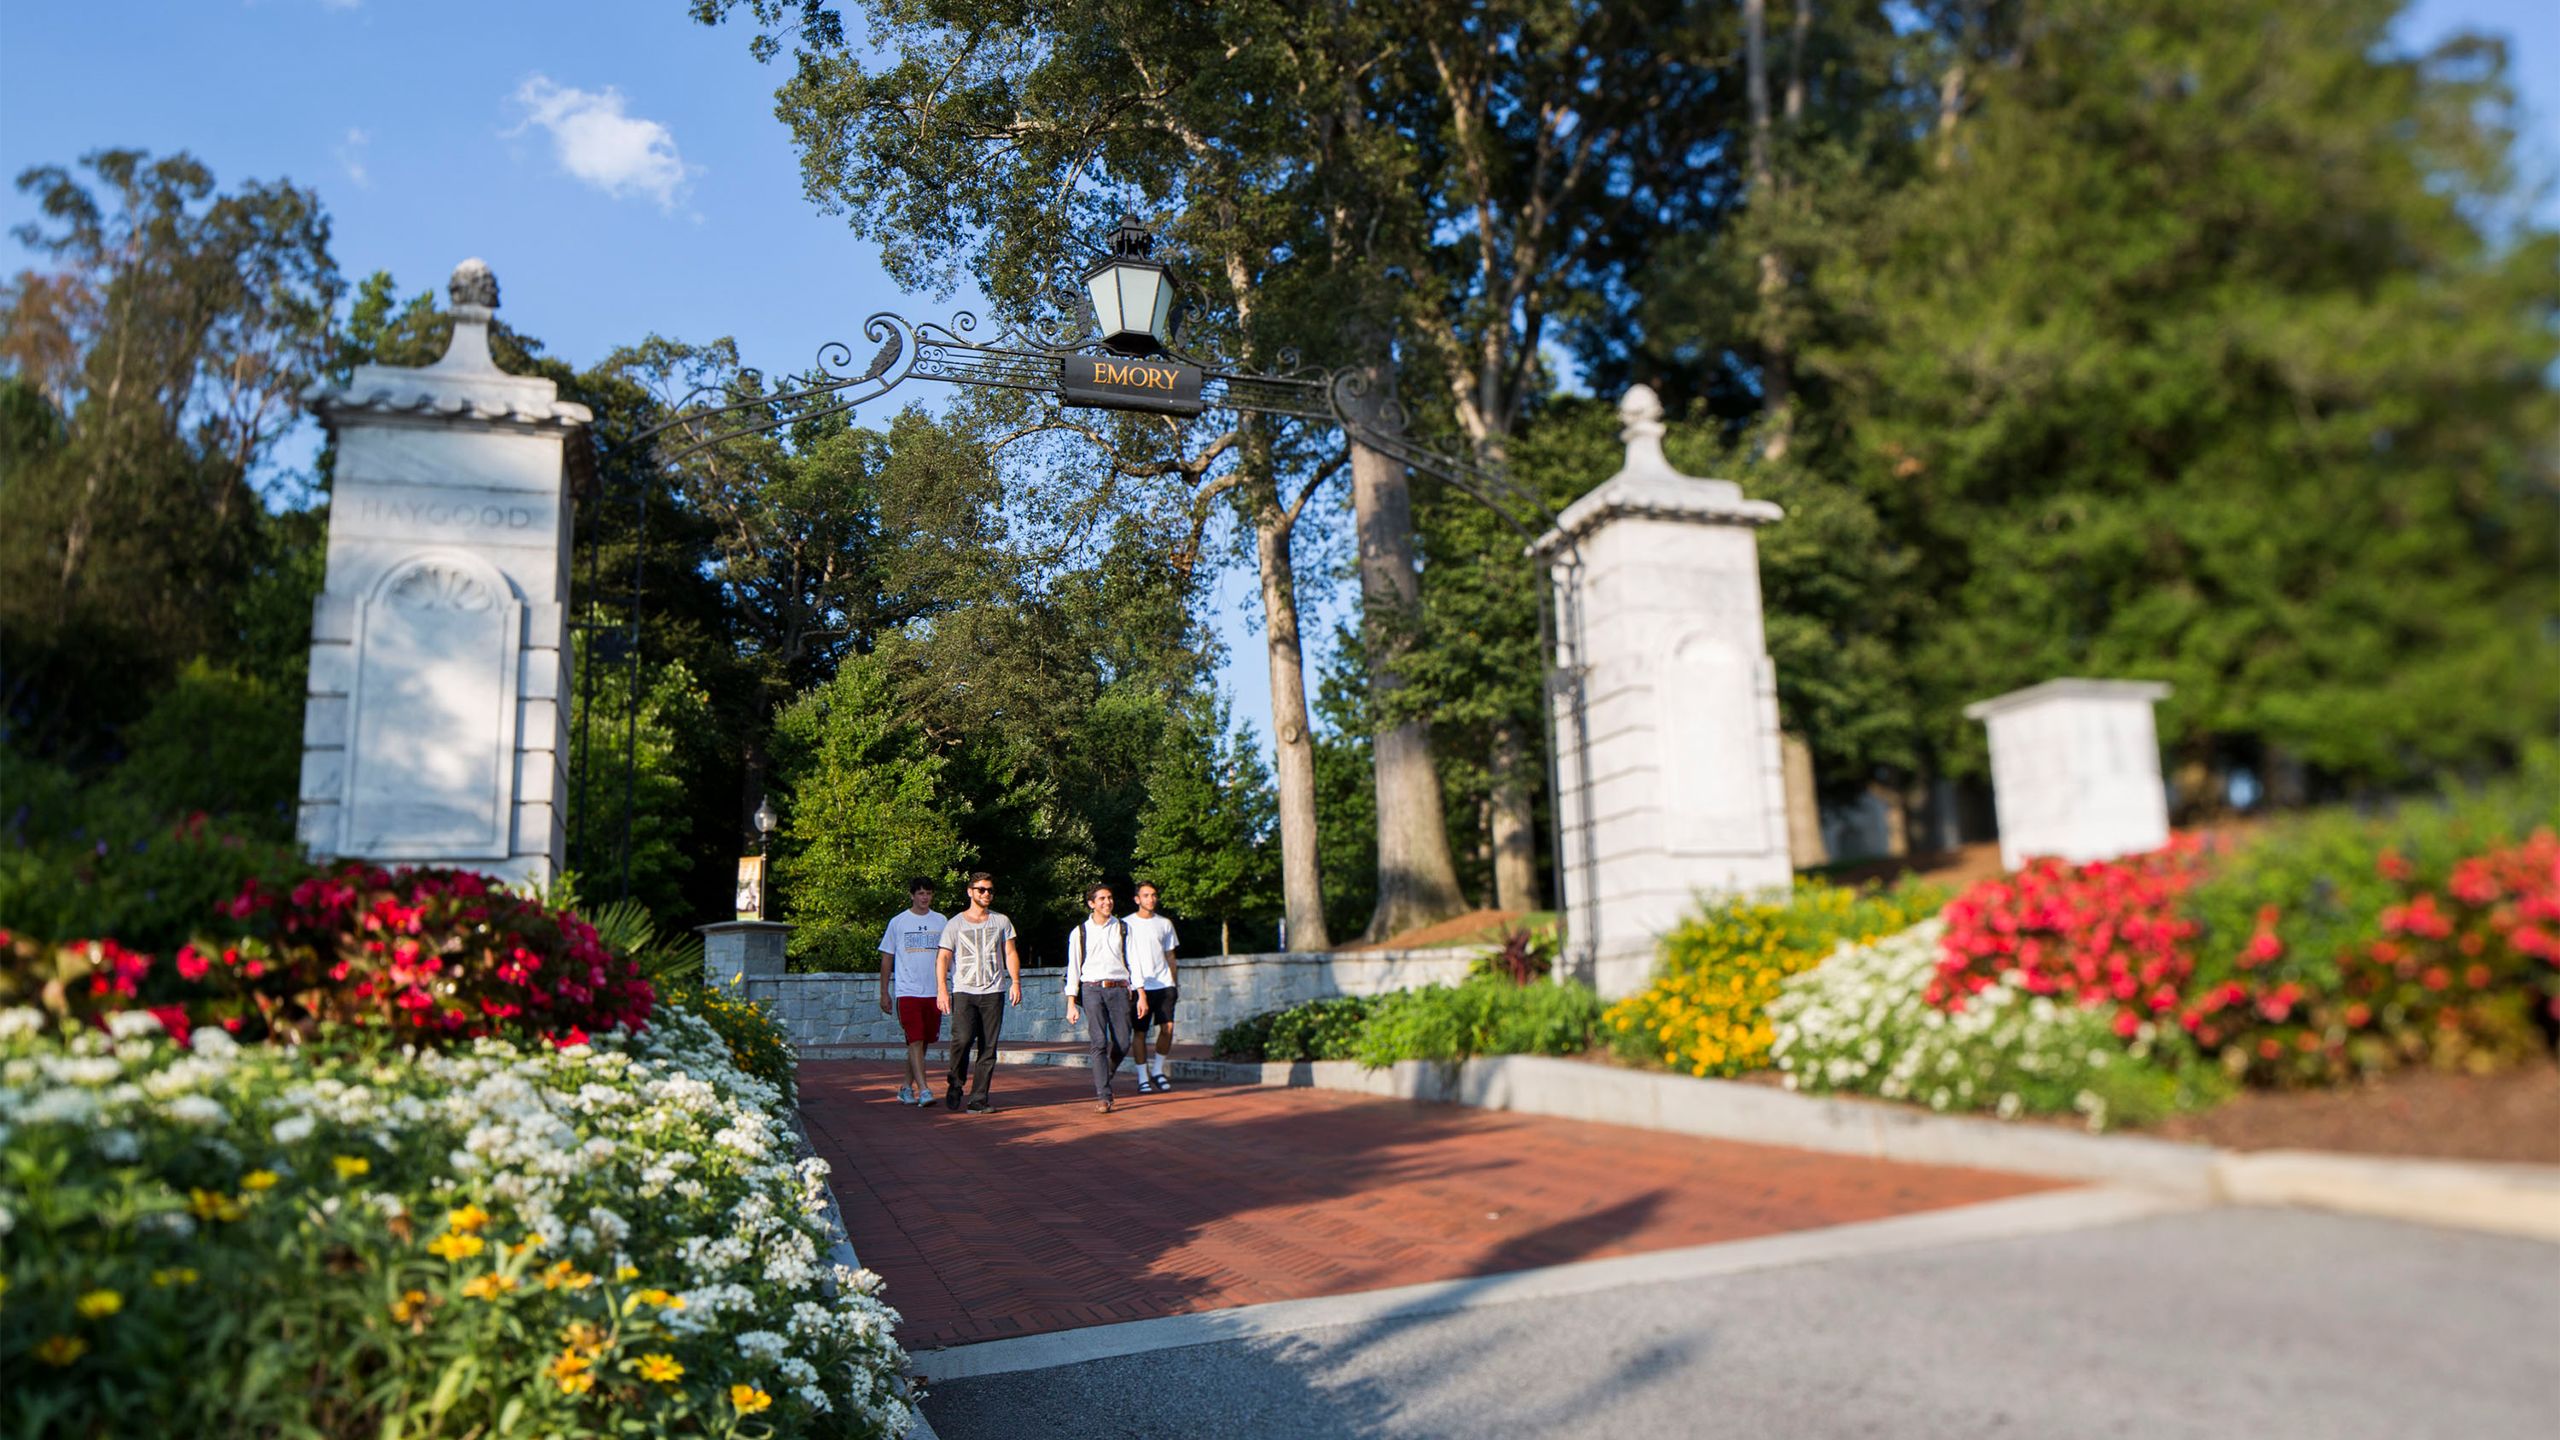 Students walk under the Emory gate onto campus